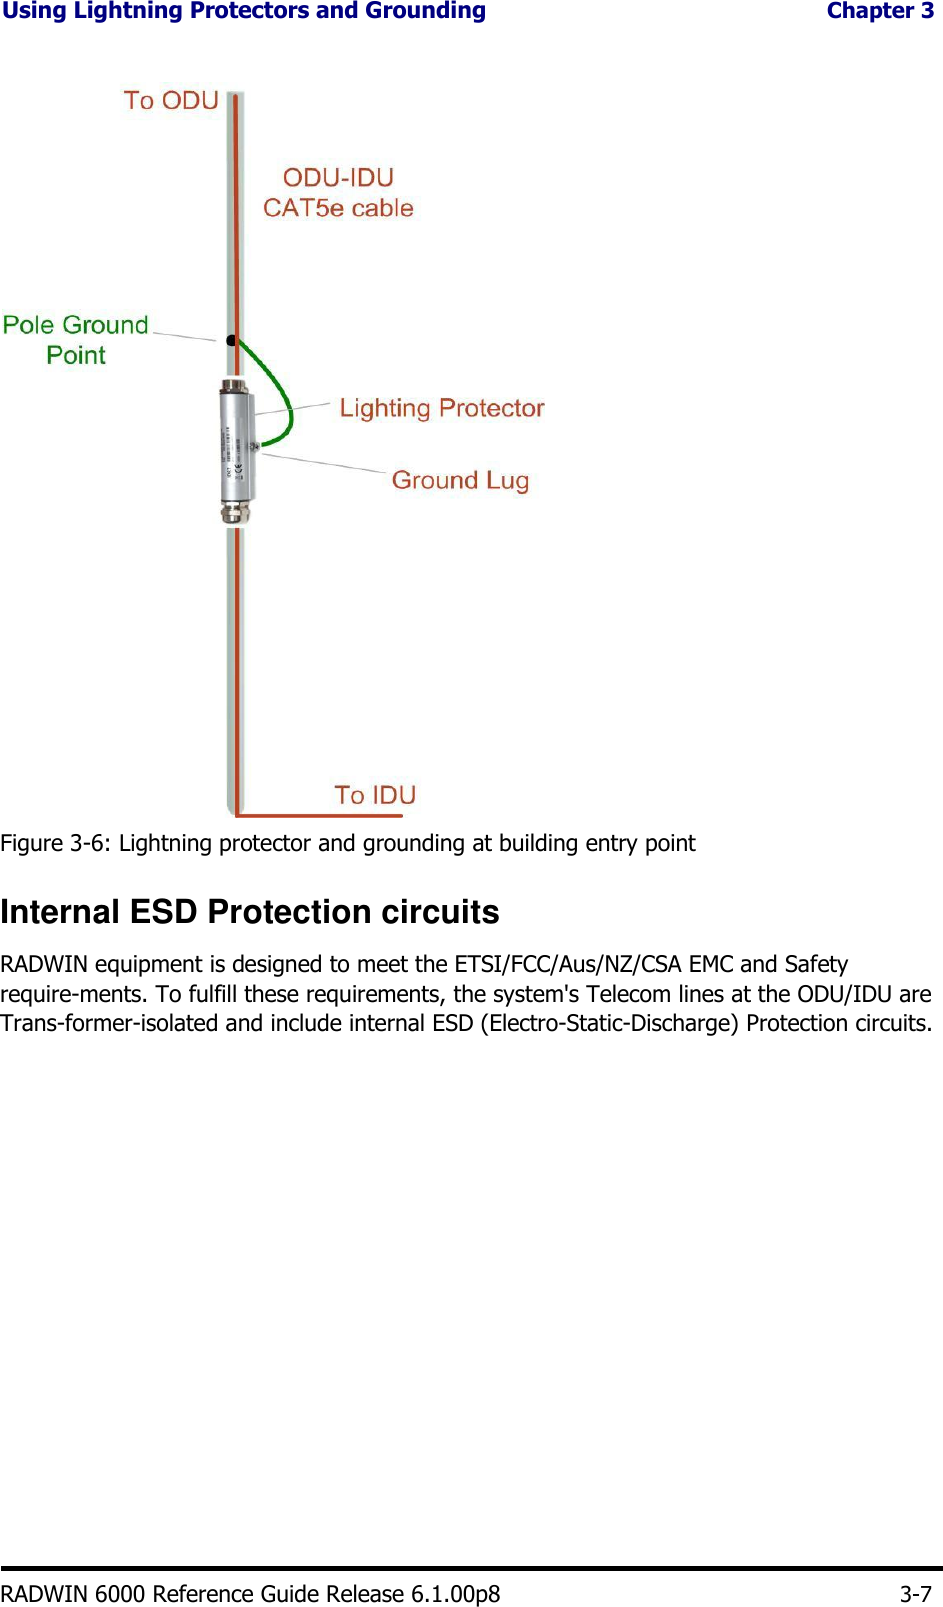 Using Lightning Protectors and Grounding Chapter 3                                       Figure 3-6: Lightning protector and grounding at building entry point  Internal ESD Protection circuits  RADWIN equipment is designed to meet the ETSI/FCC/Aus/NZ/CSA EMC and Safety require-ments. To fulfill these requirements, the system&apos;s Telecom lines at the ODU/IDU are Trans-former-isolated and include internal ESD (Electro-Static-Discharge) Protection circuits.                          RADWIN 6000 Reference Guide Release 6.1.00p8      3-7 